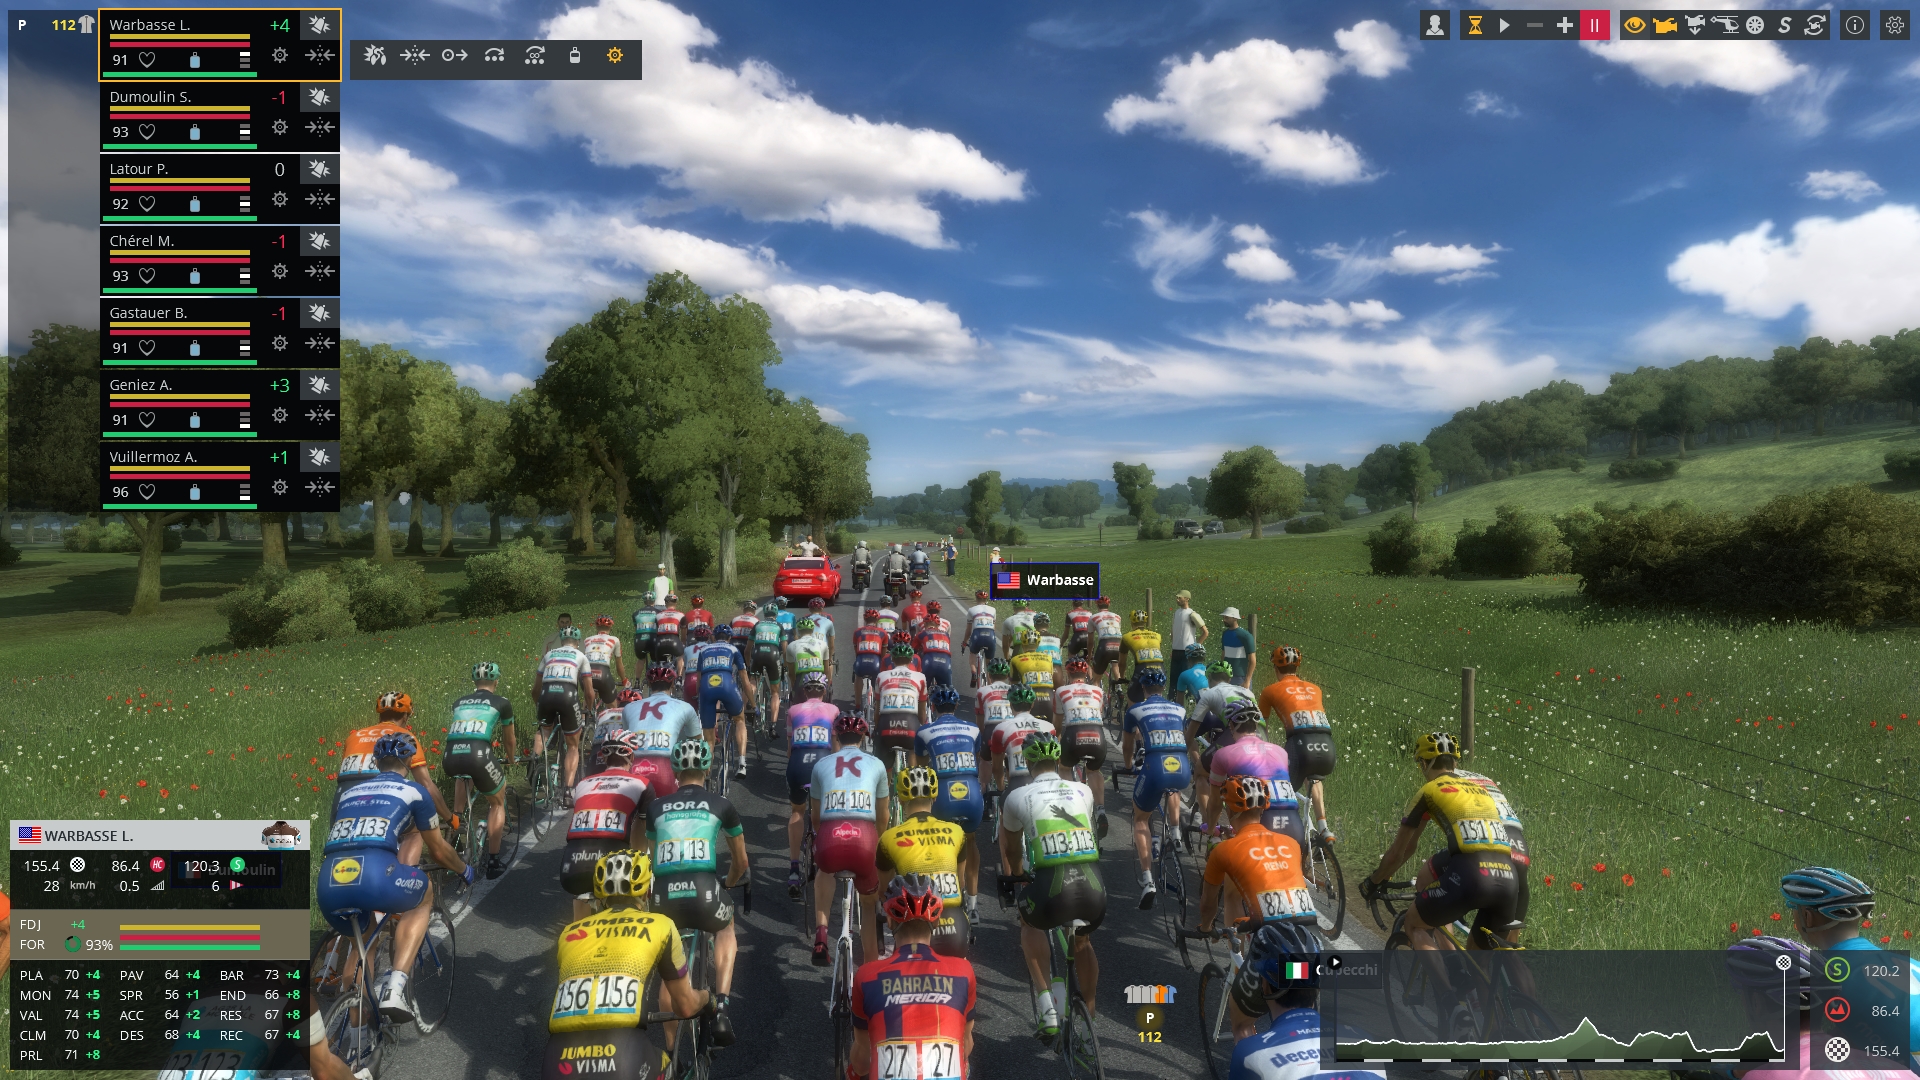 Find the best laptops for Pro Cycling Manager 2019